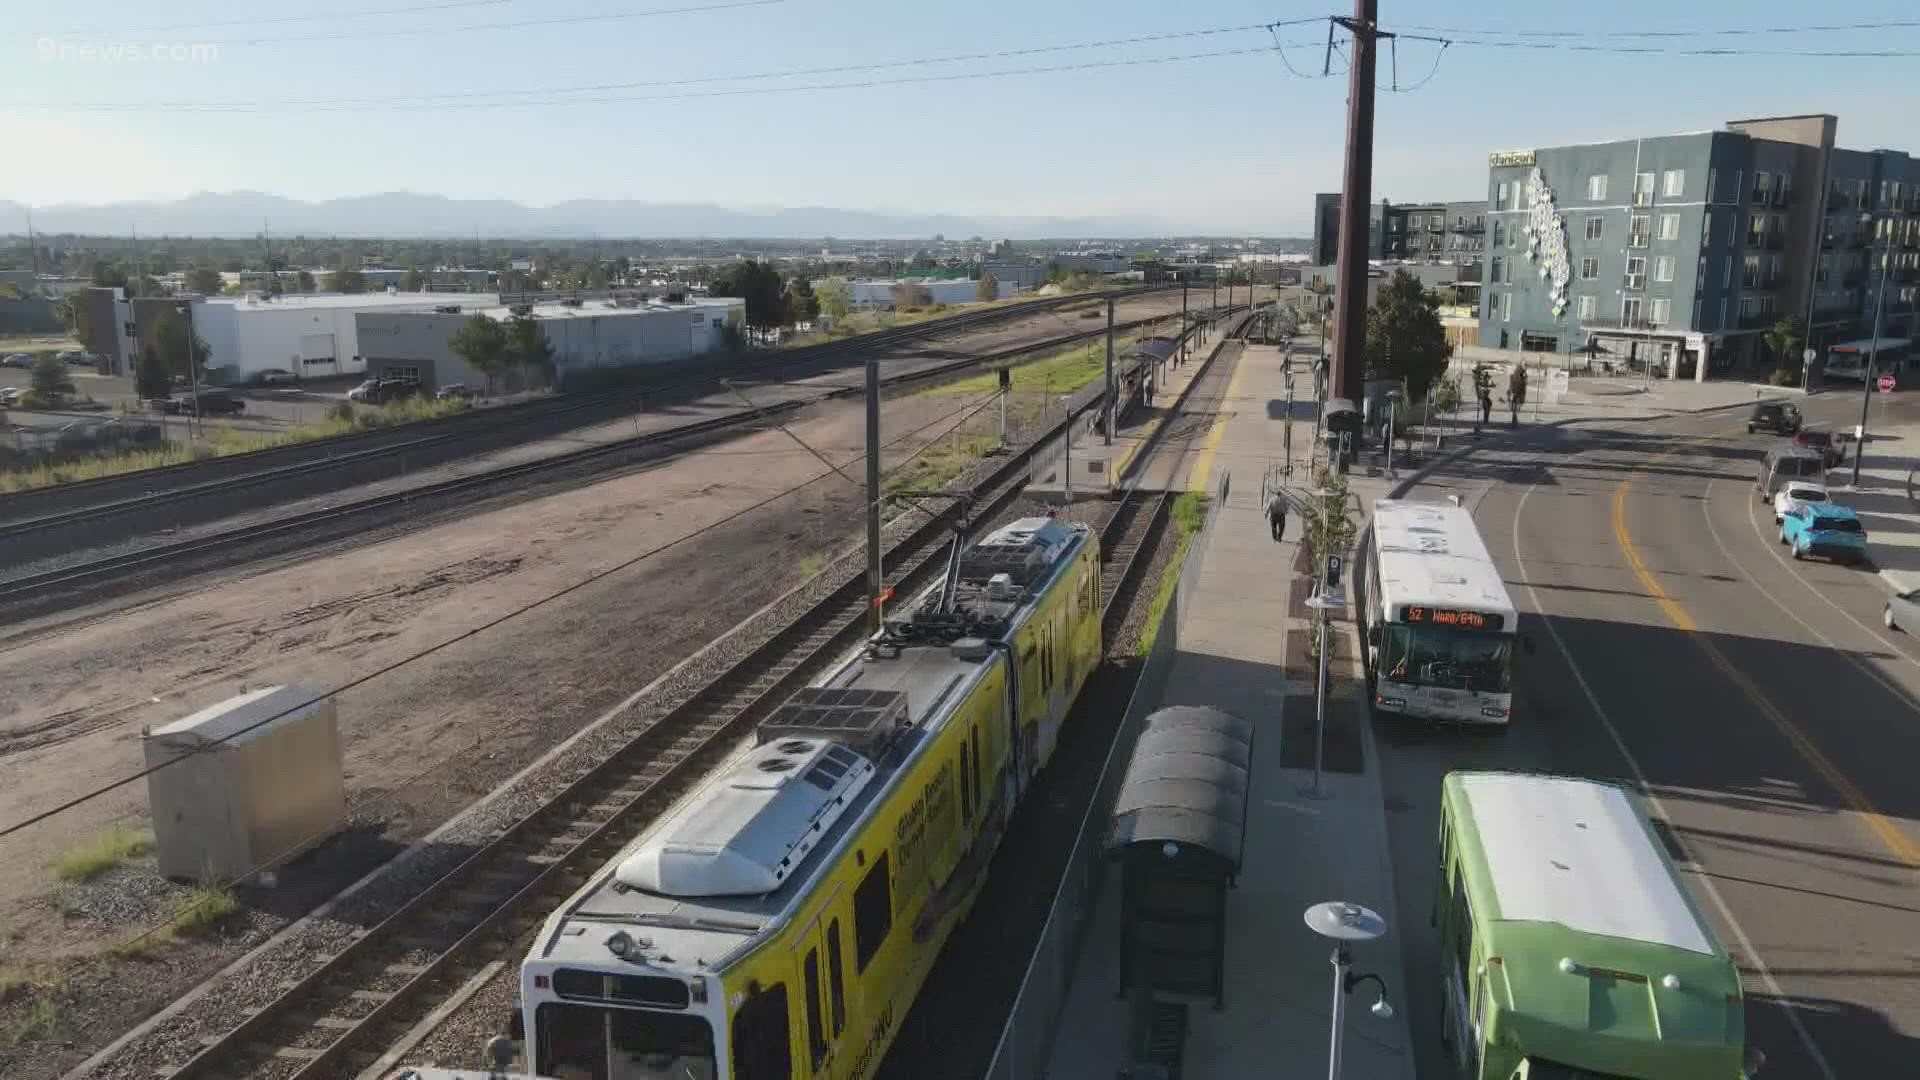 RTD said it needs to replace one of the oldest sections of track on Denver's light rail system.